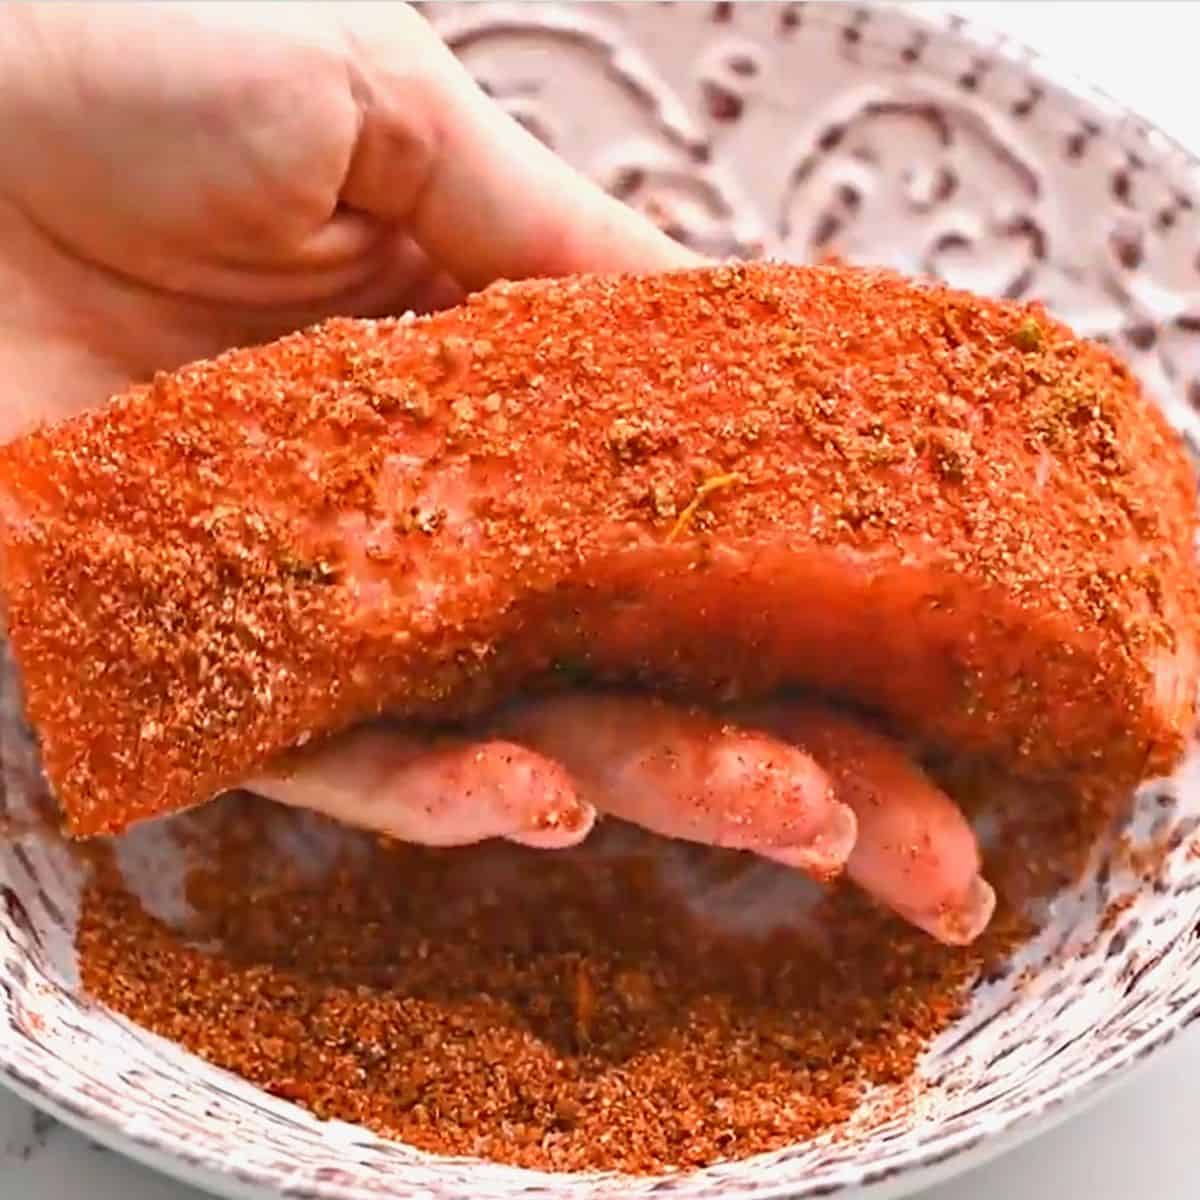 Coating Salmon Fillets with Spice Rub